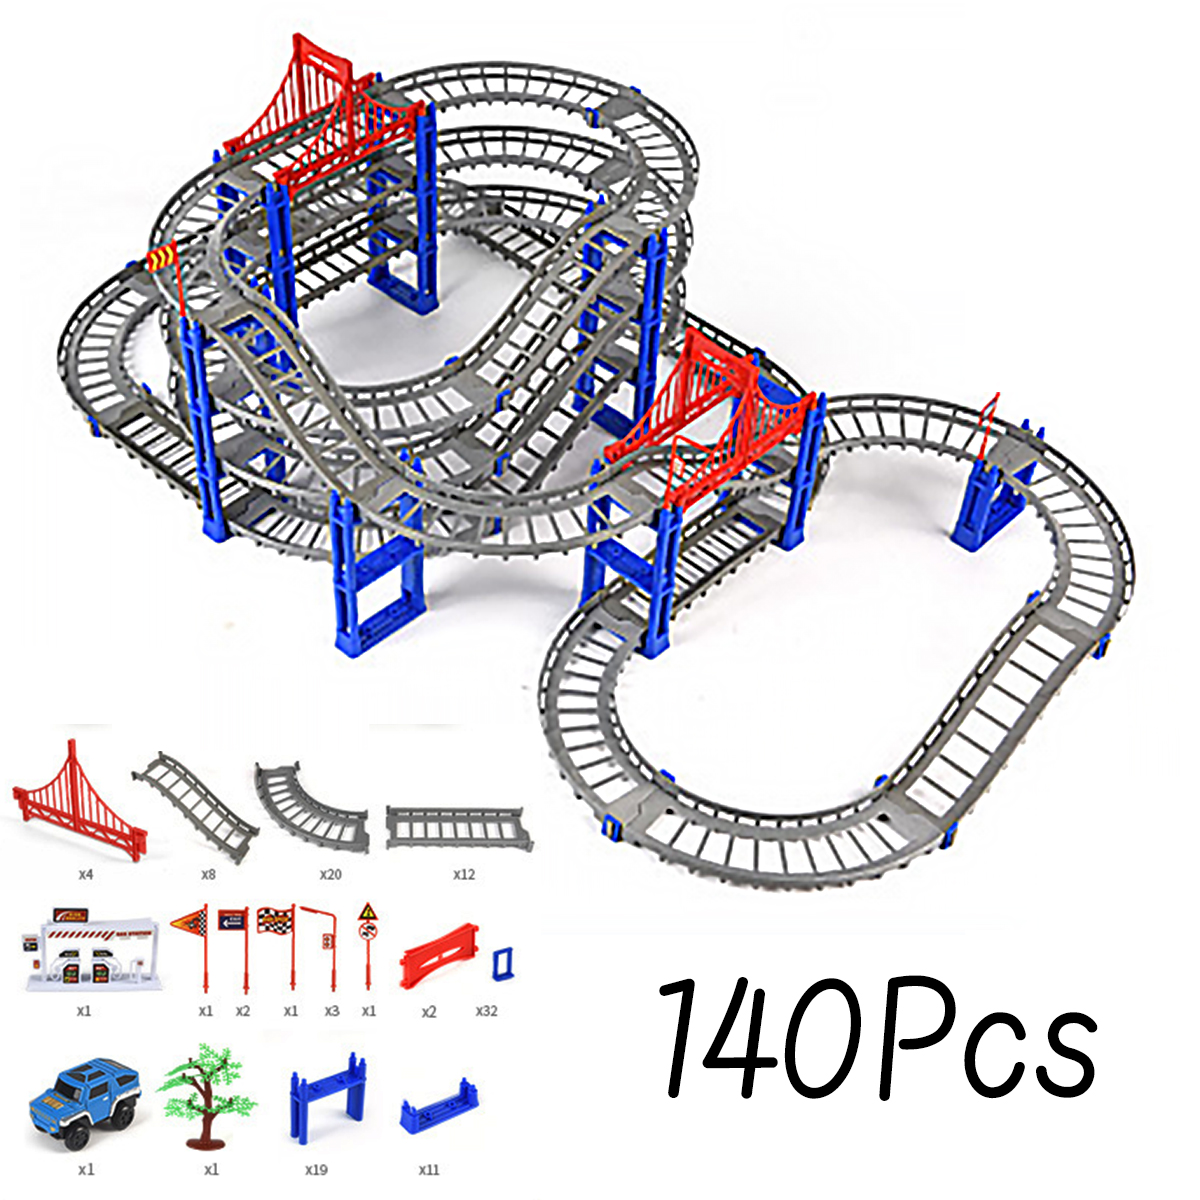 80/91/140Pcs DIY Assembly Electric ABS Track Car Model Set Puzzle Educational Toy for Kids